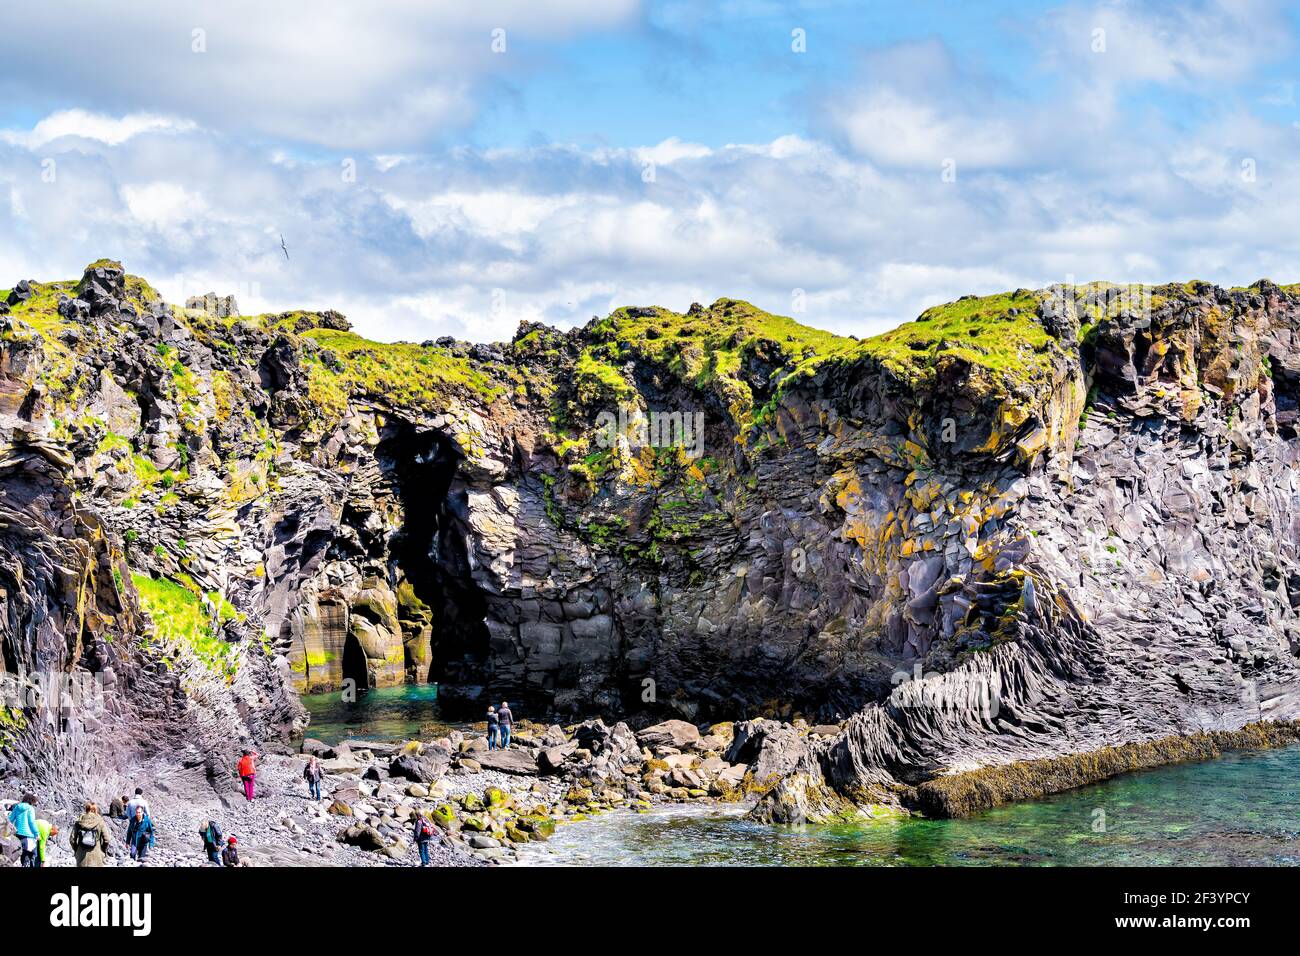 Snaefellsjokull, Iceland - June 18, 2018: Landscape view of rocky formation in Hellnar National park Snaefellsnes Peninsula with ocean and cave cove p Stock Photo